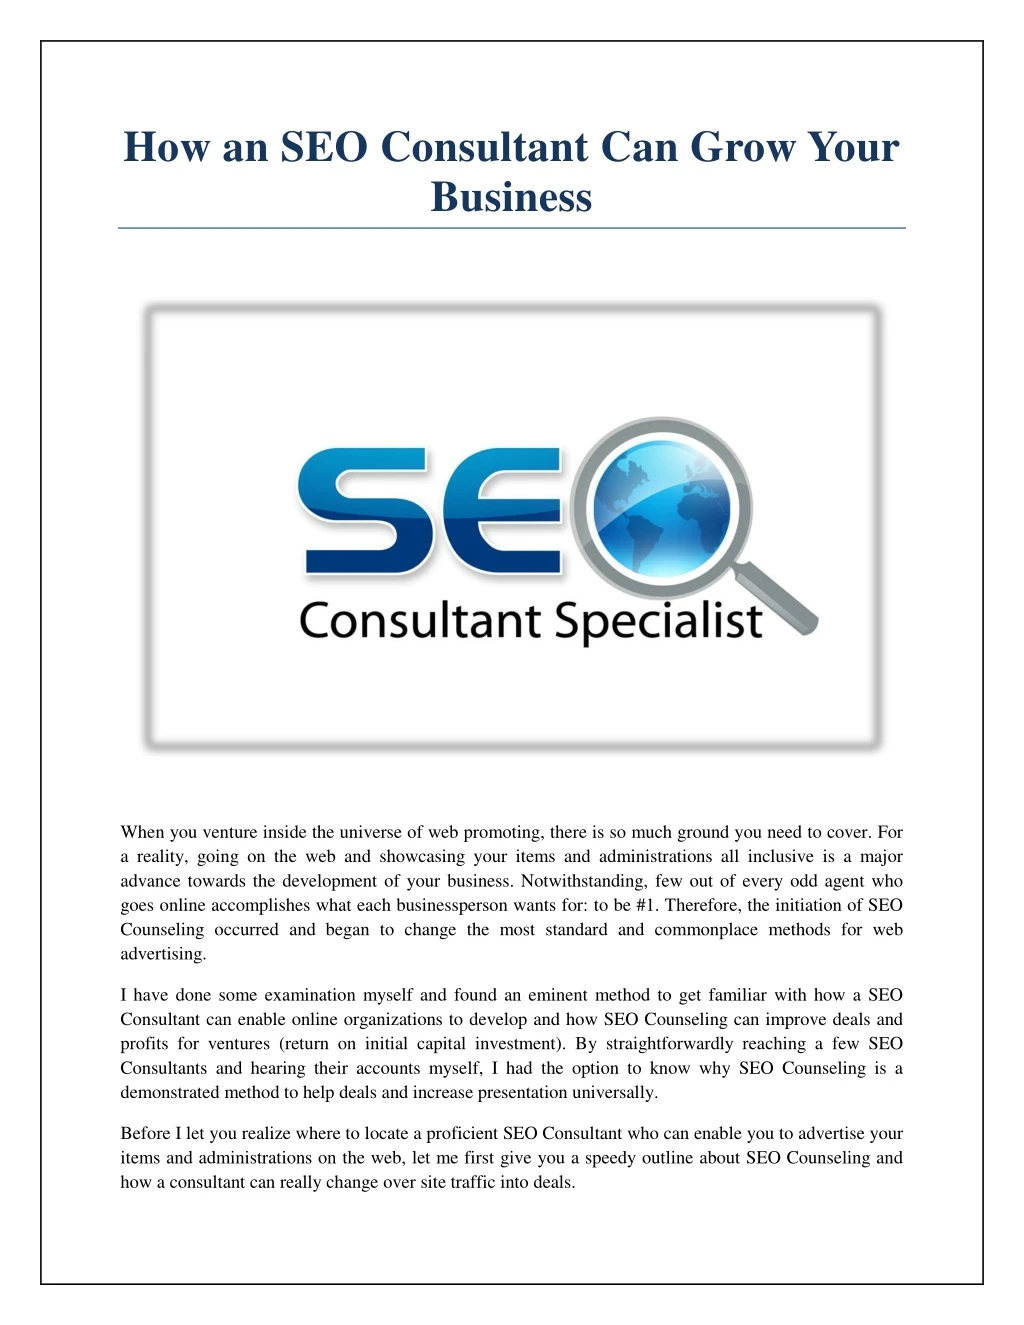 how an seo consultant can grow your business